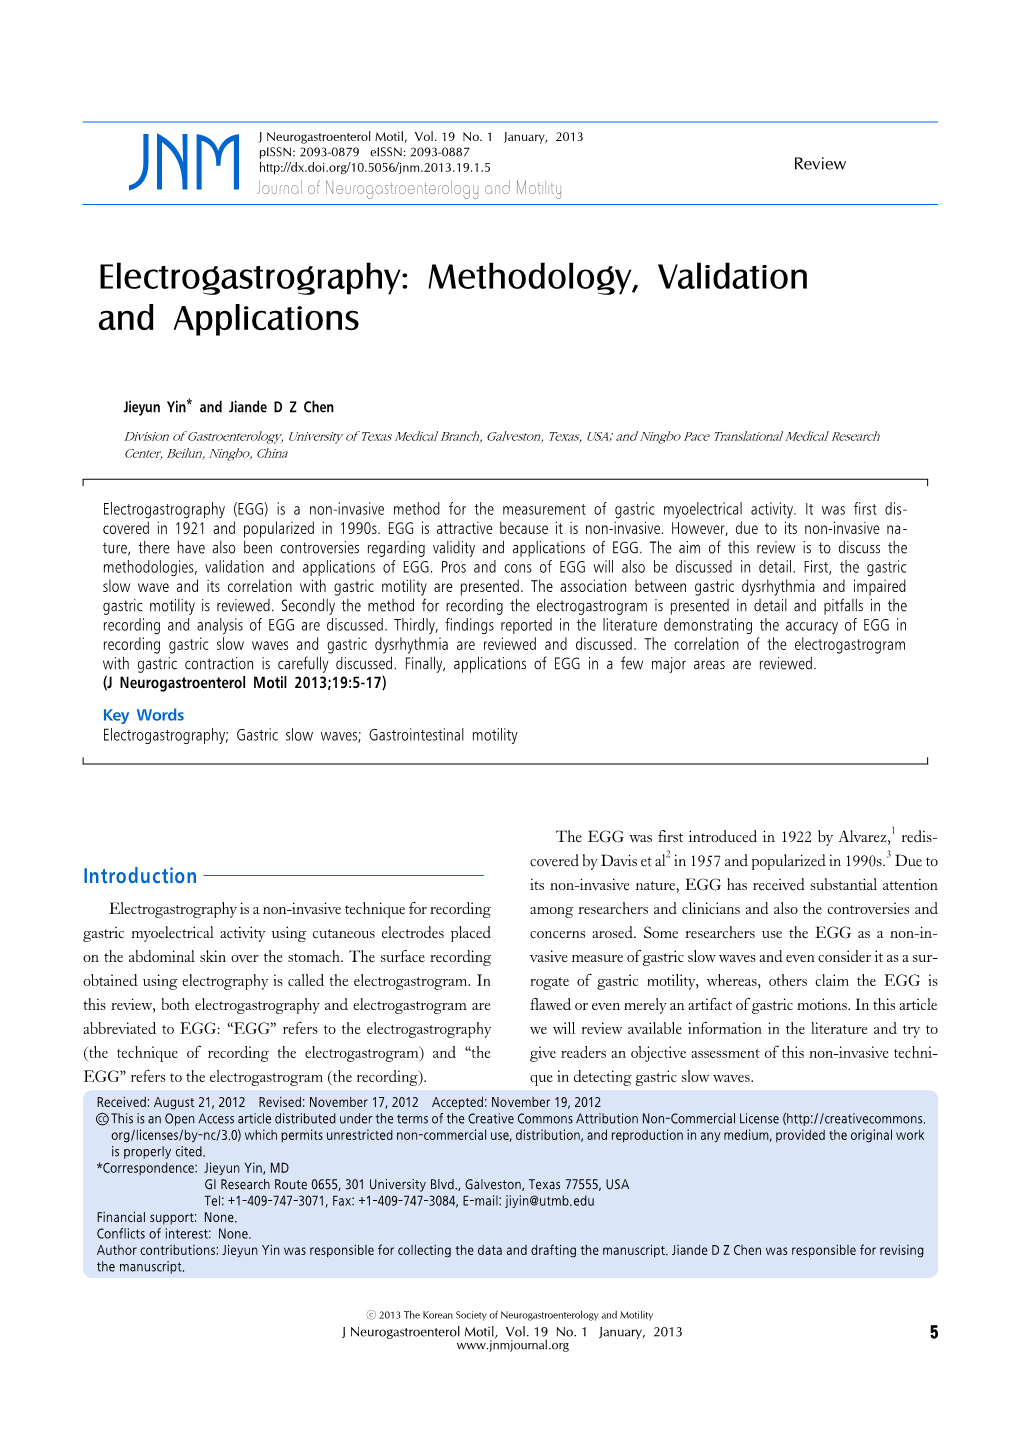 Electrogastrography: Methodology, Validation and Applications